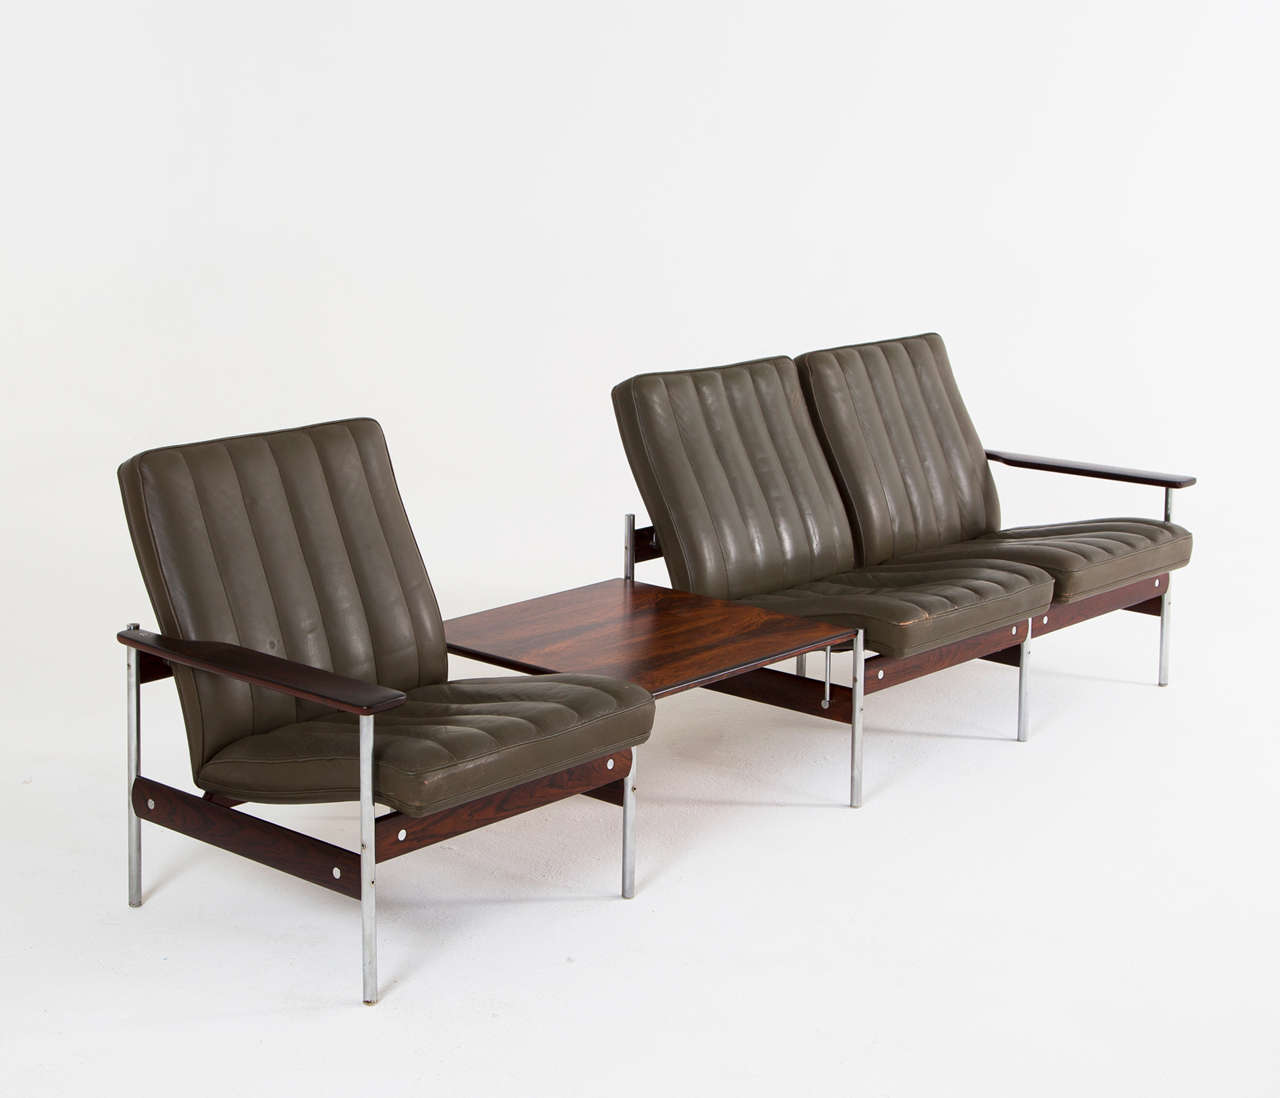 Very sophisticated three-seater sofa by Sven Ivar Dysthe for Dokke Møbler, Norway, 1959. The base of this setee is made out of modular rosewood and stainless steel pieces. A clever design makes that the seat seems to float on its base.

The seats